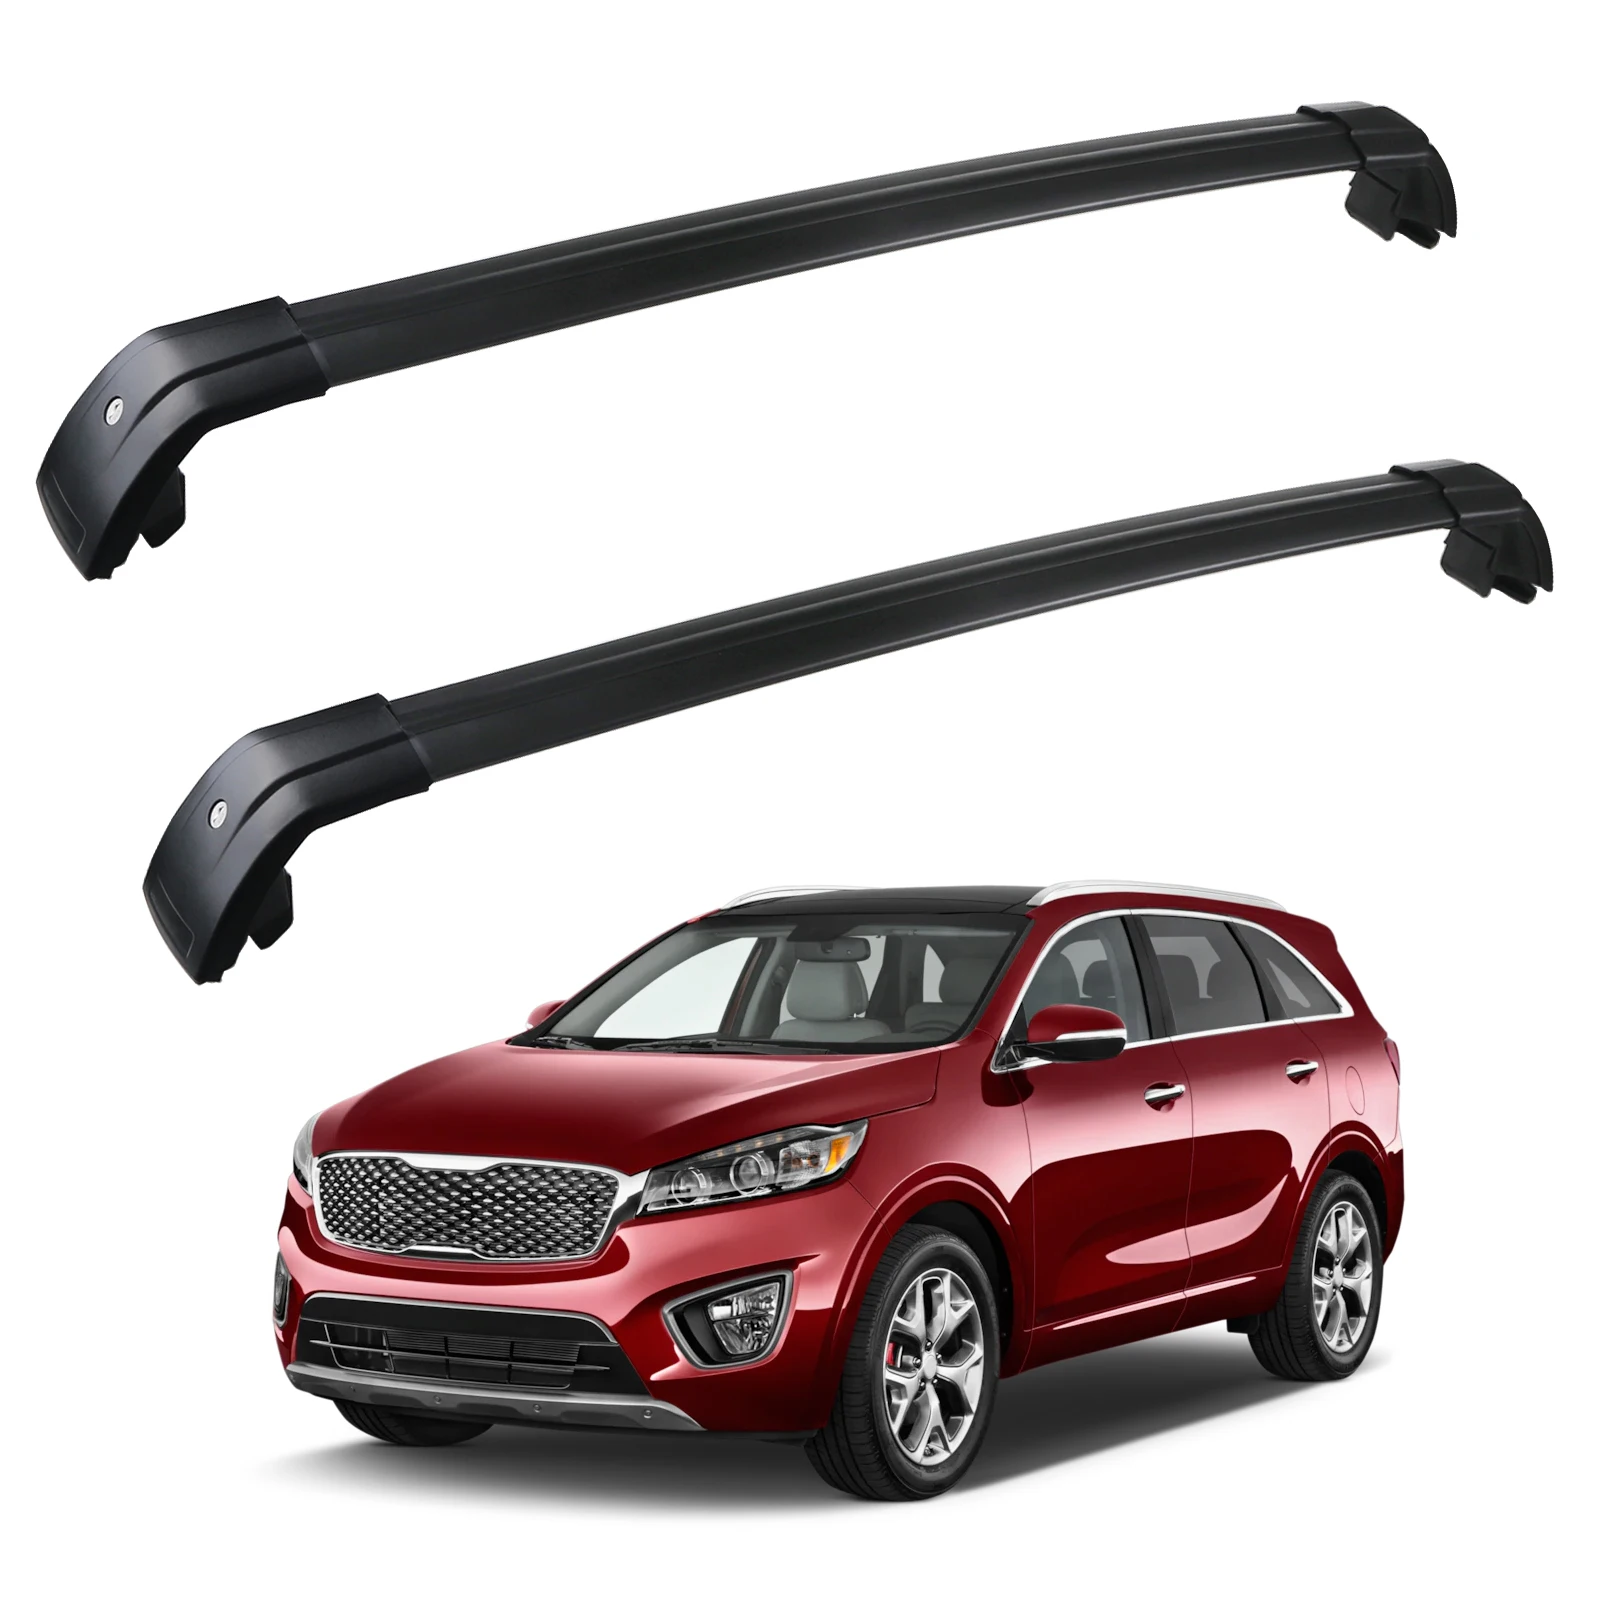 

For Toyota Highlander 2014 -2019 Car Roof Rack Cross Bars XLE & Limited & SE/LE SUV Car Luggage Carrier Roof Rail 150LBS Load